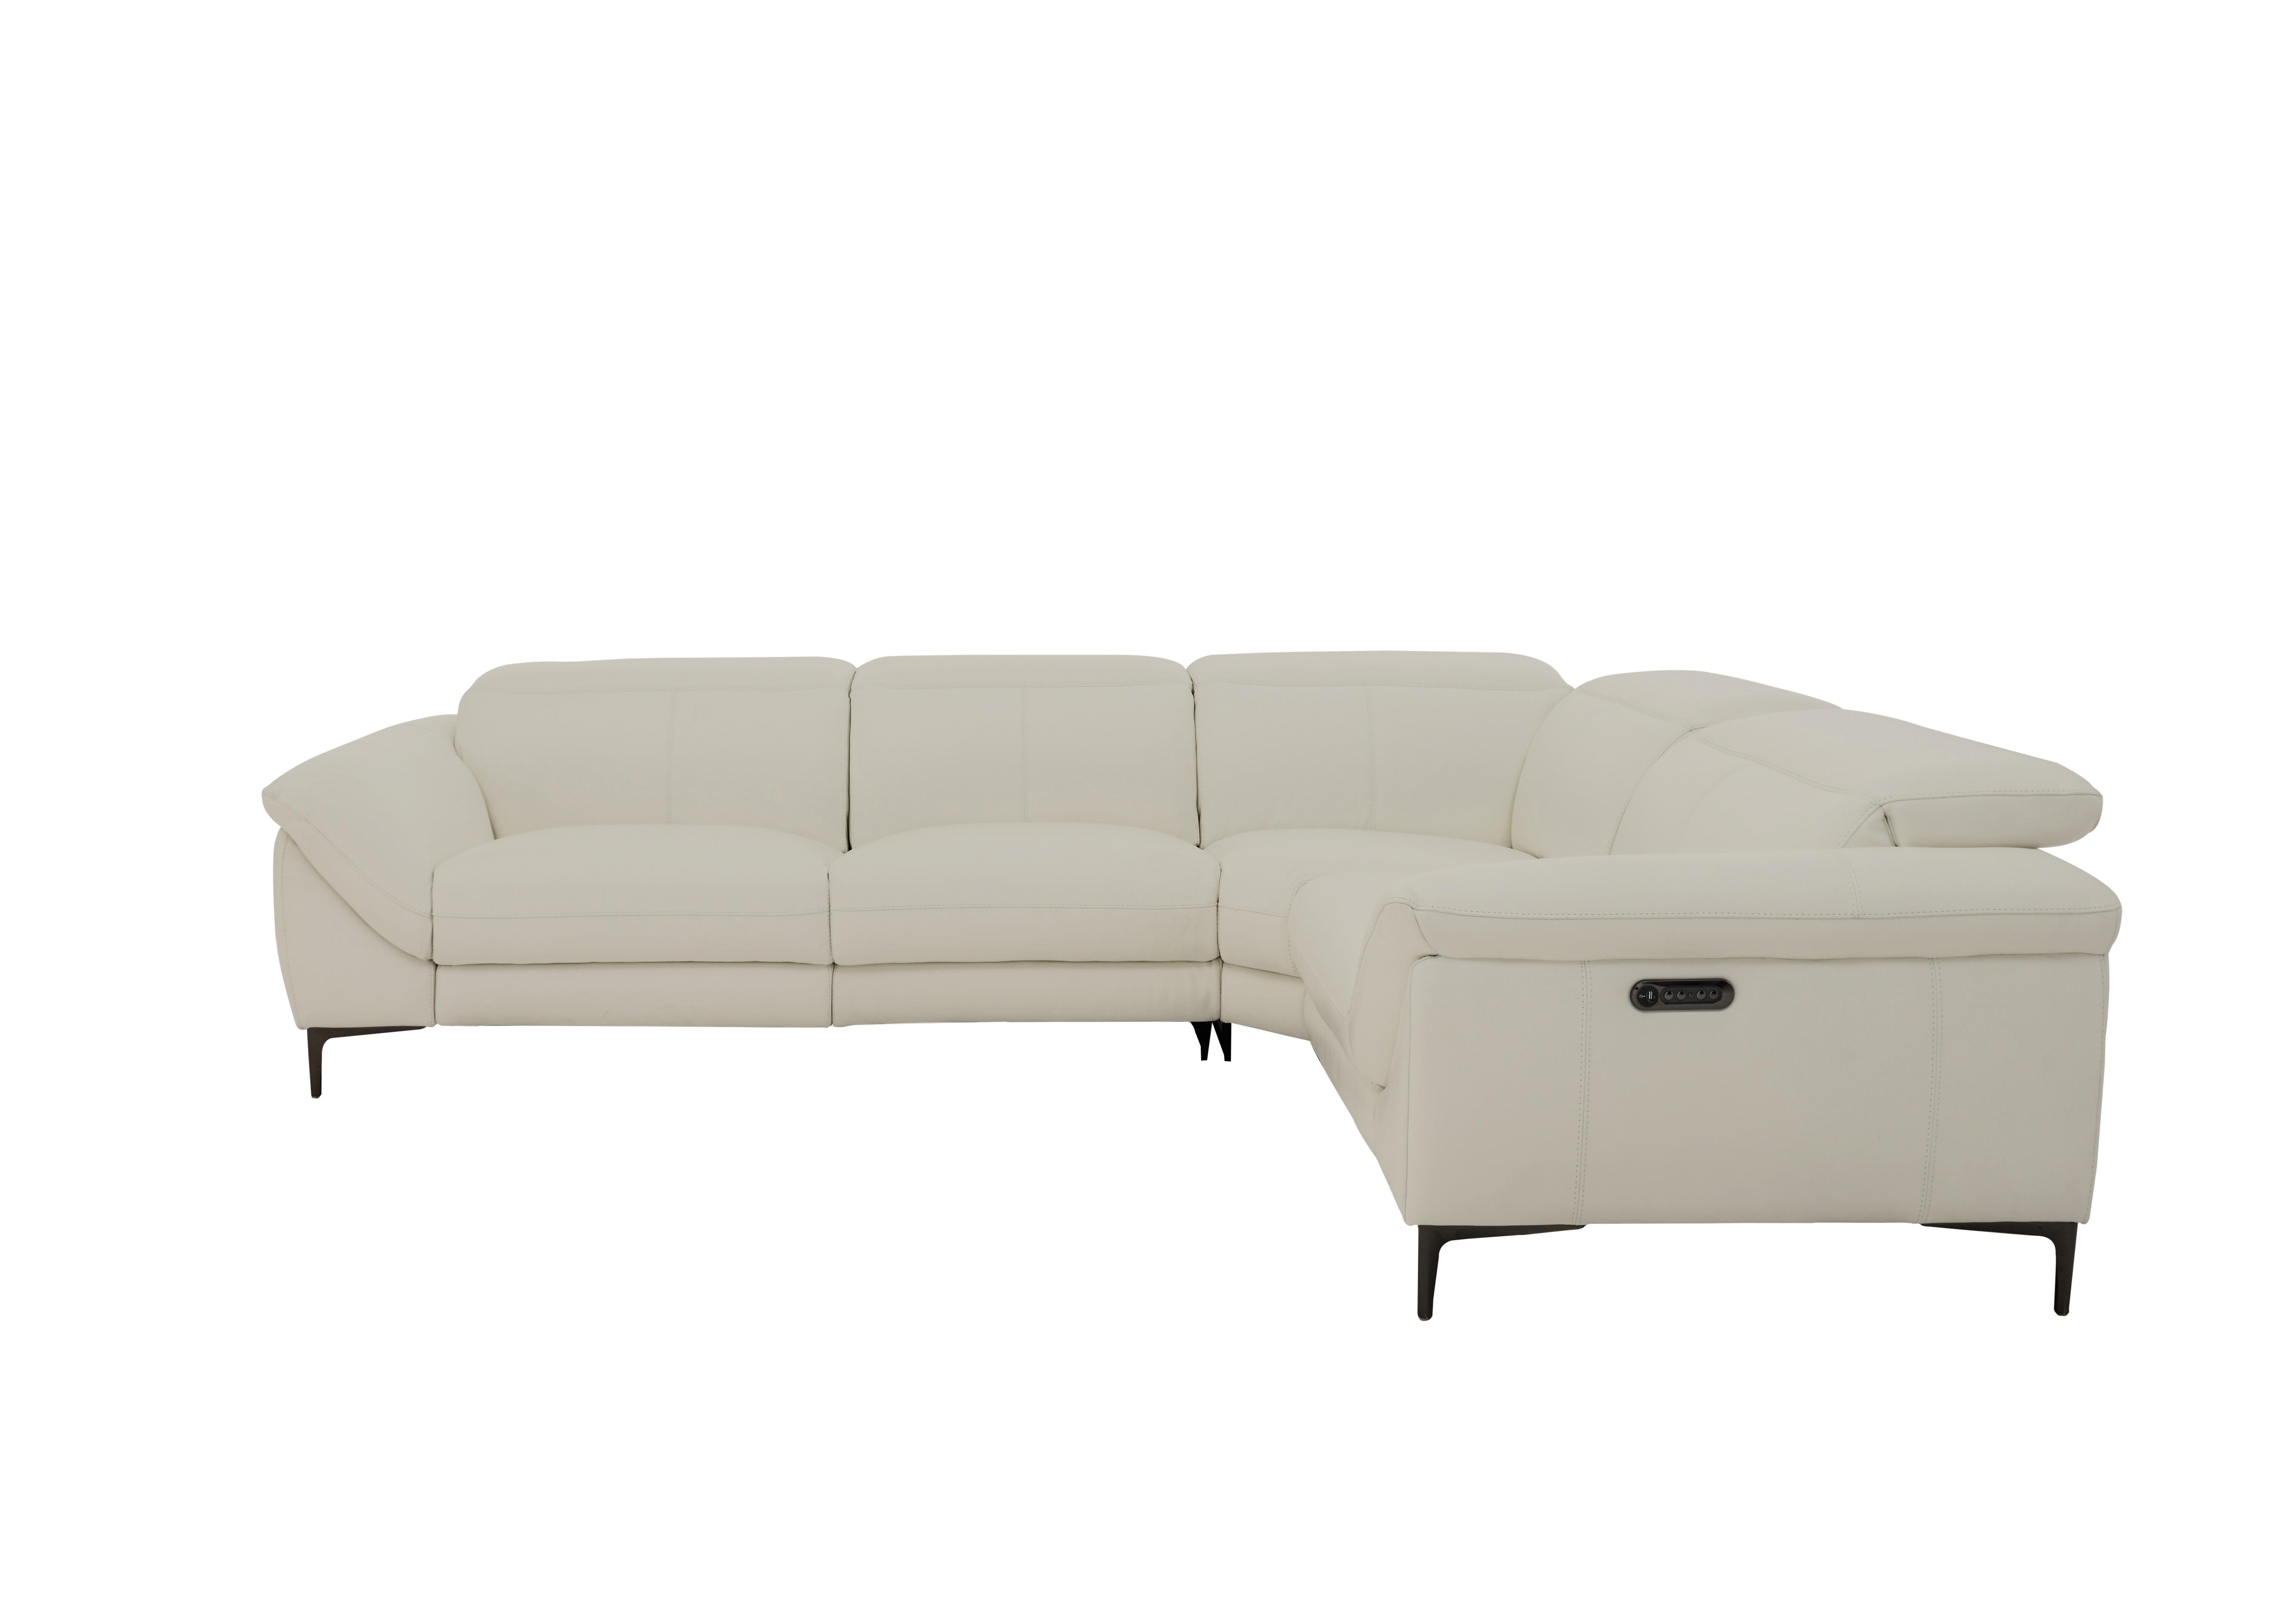 galaxy leather sofa reviews